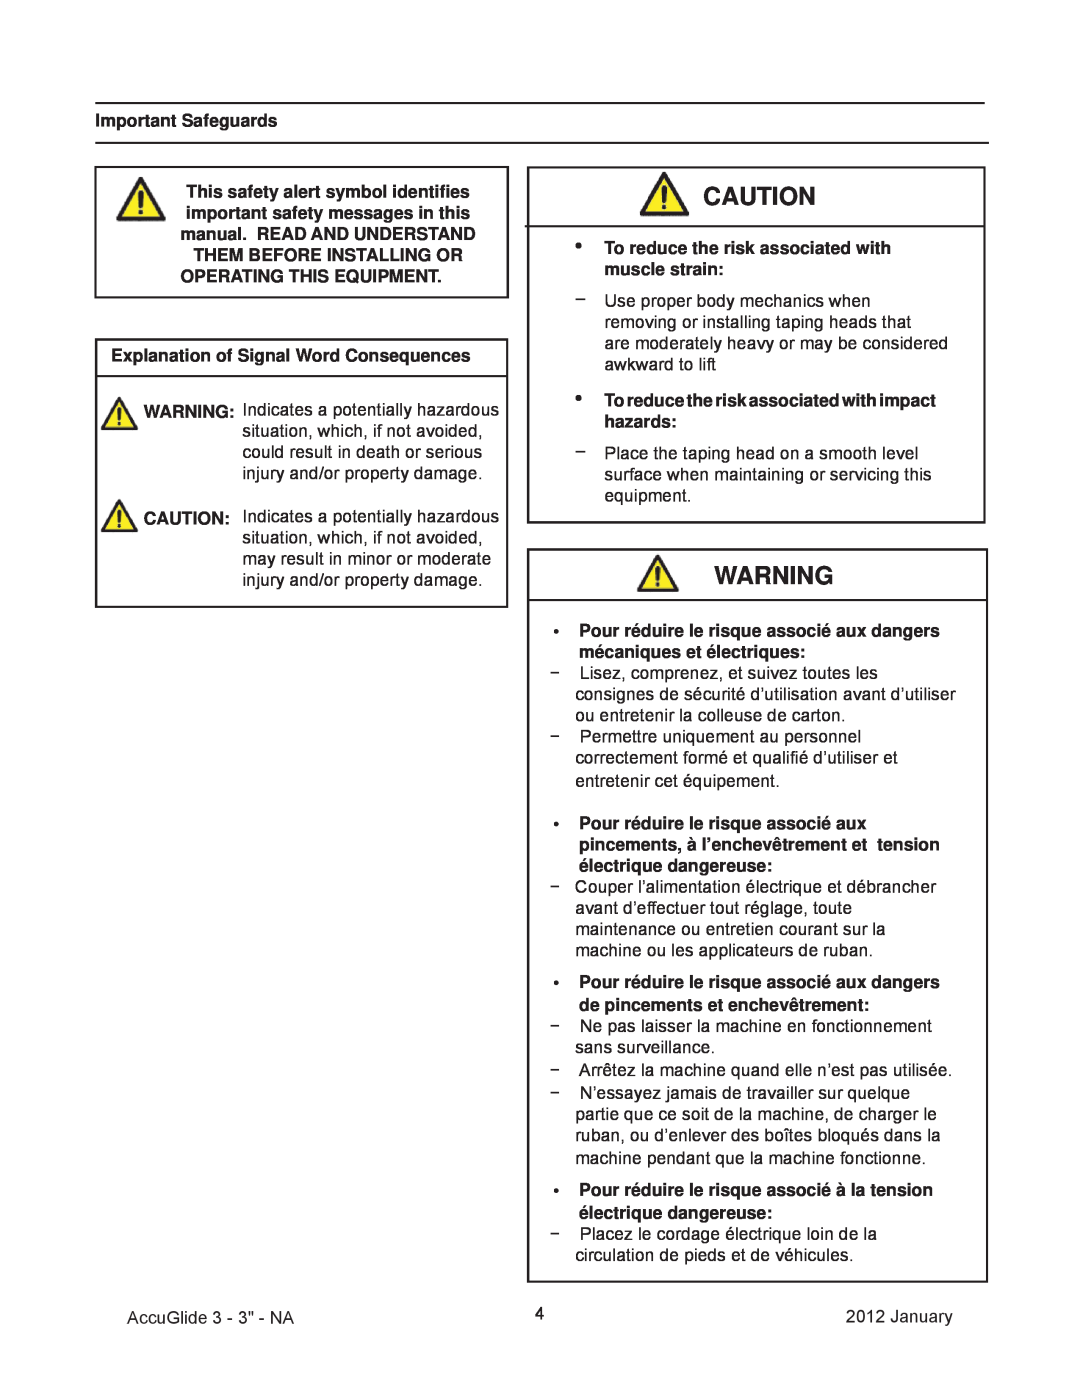 3M 40800 Important Safeguards, Operating This Equipment, Explanation of Signal Word Consequences, électrique dangereuse 